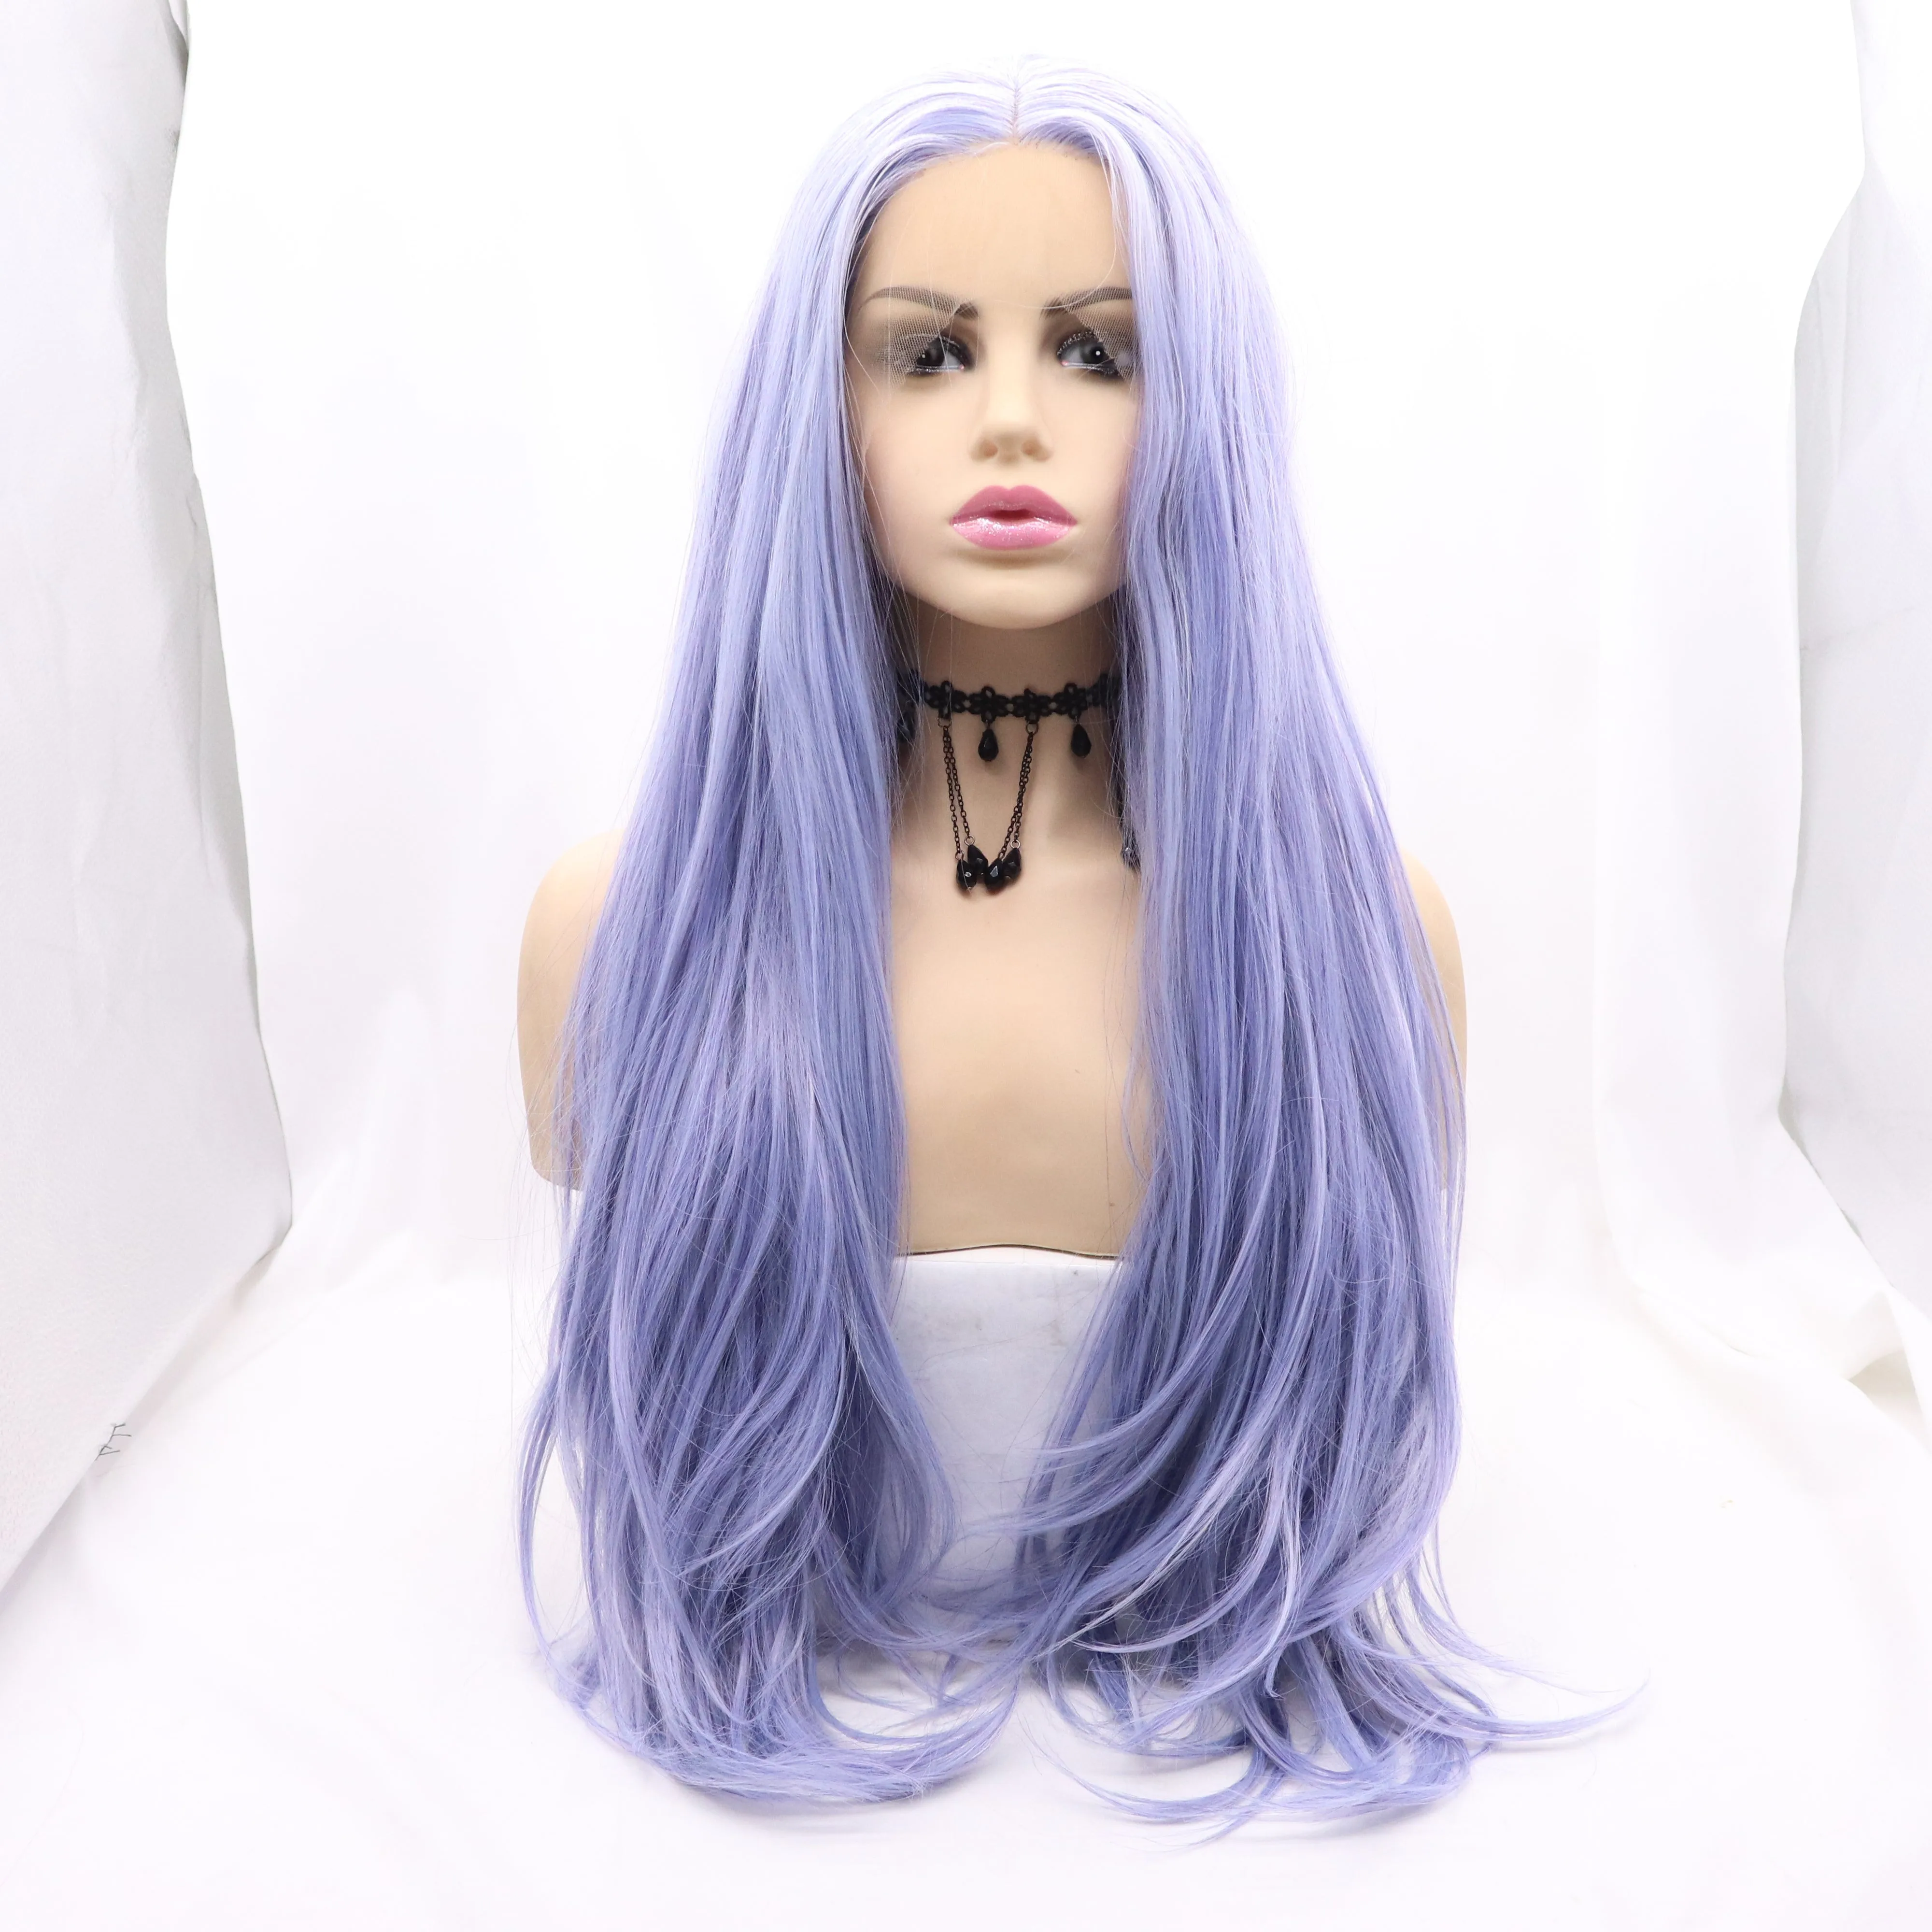 Blue Wavy Long Wavy Lace Front High Heat Resistant Fiber Synthetic Hair Wigs Costume Wig for Women